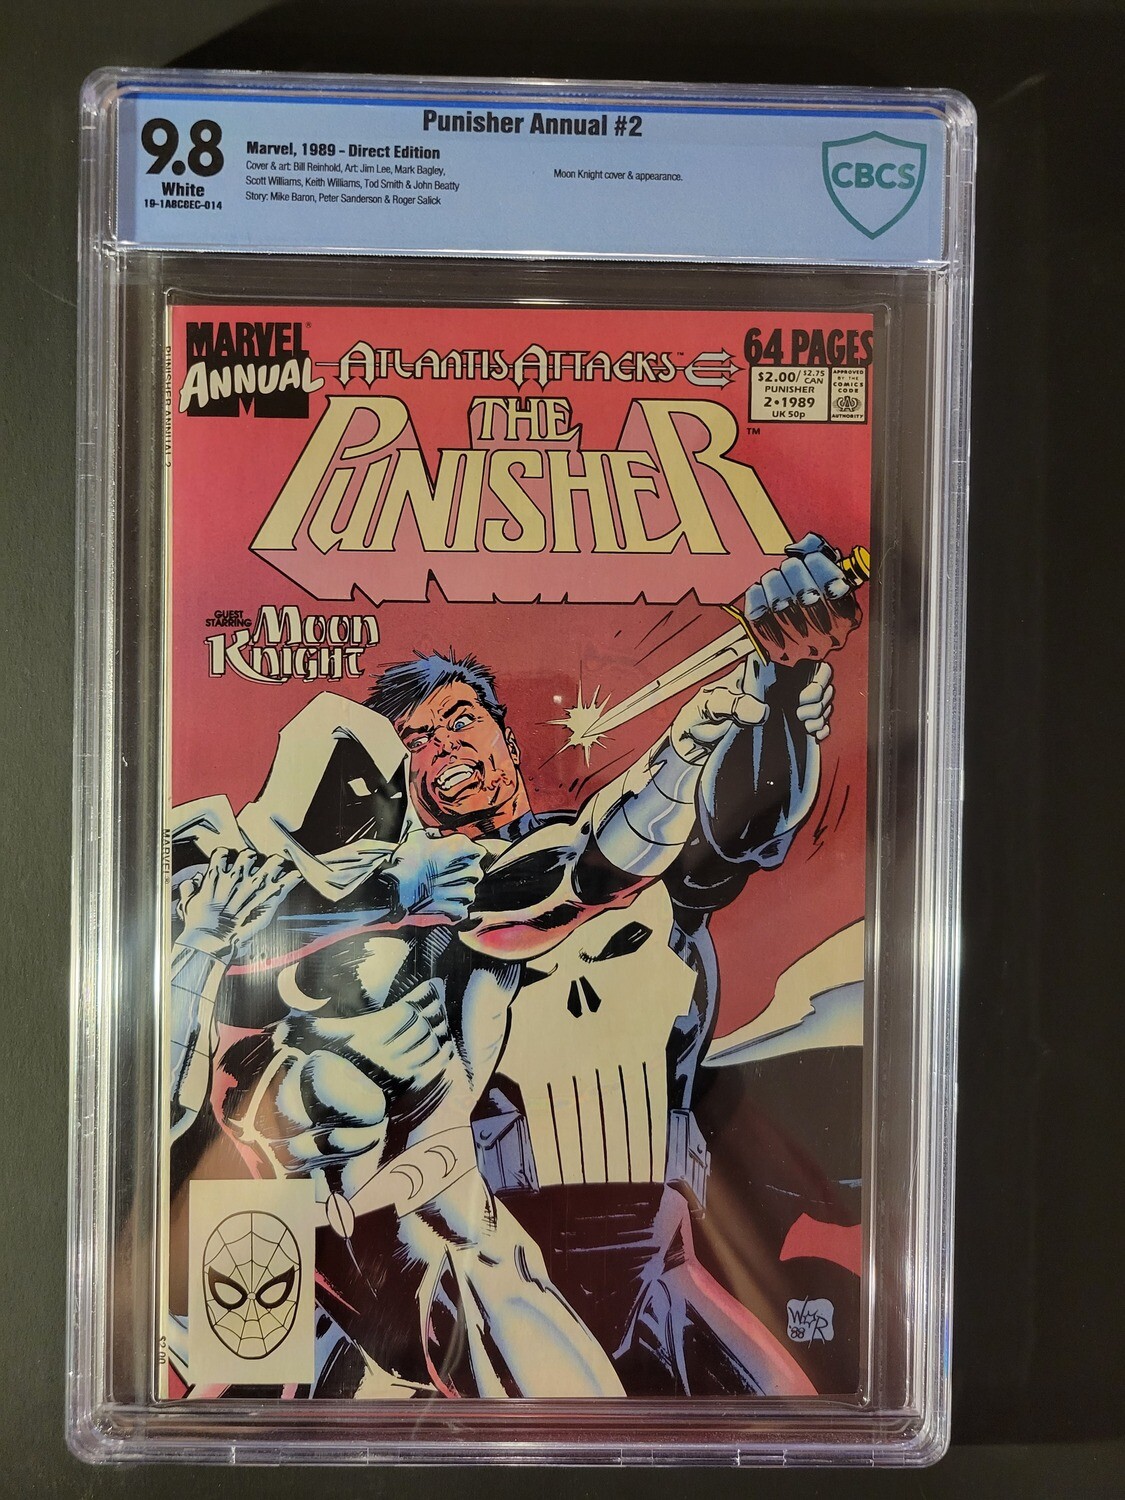 Punisher Annual #2 CBCS 9.8